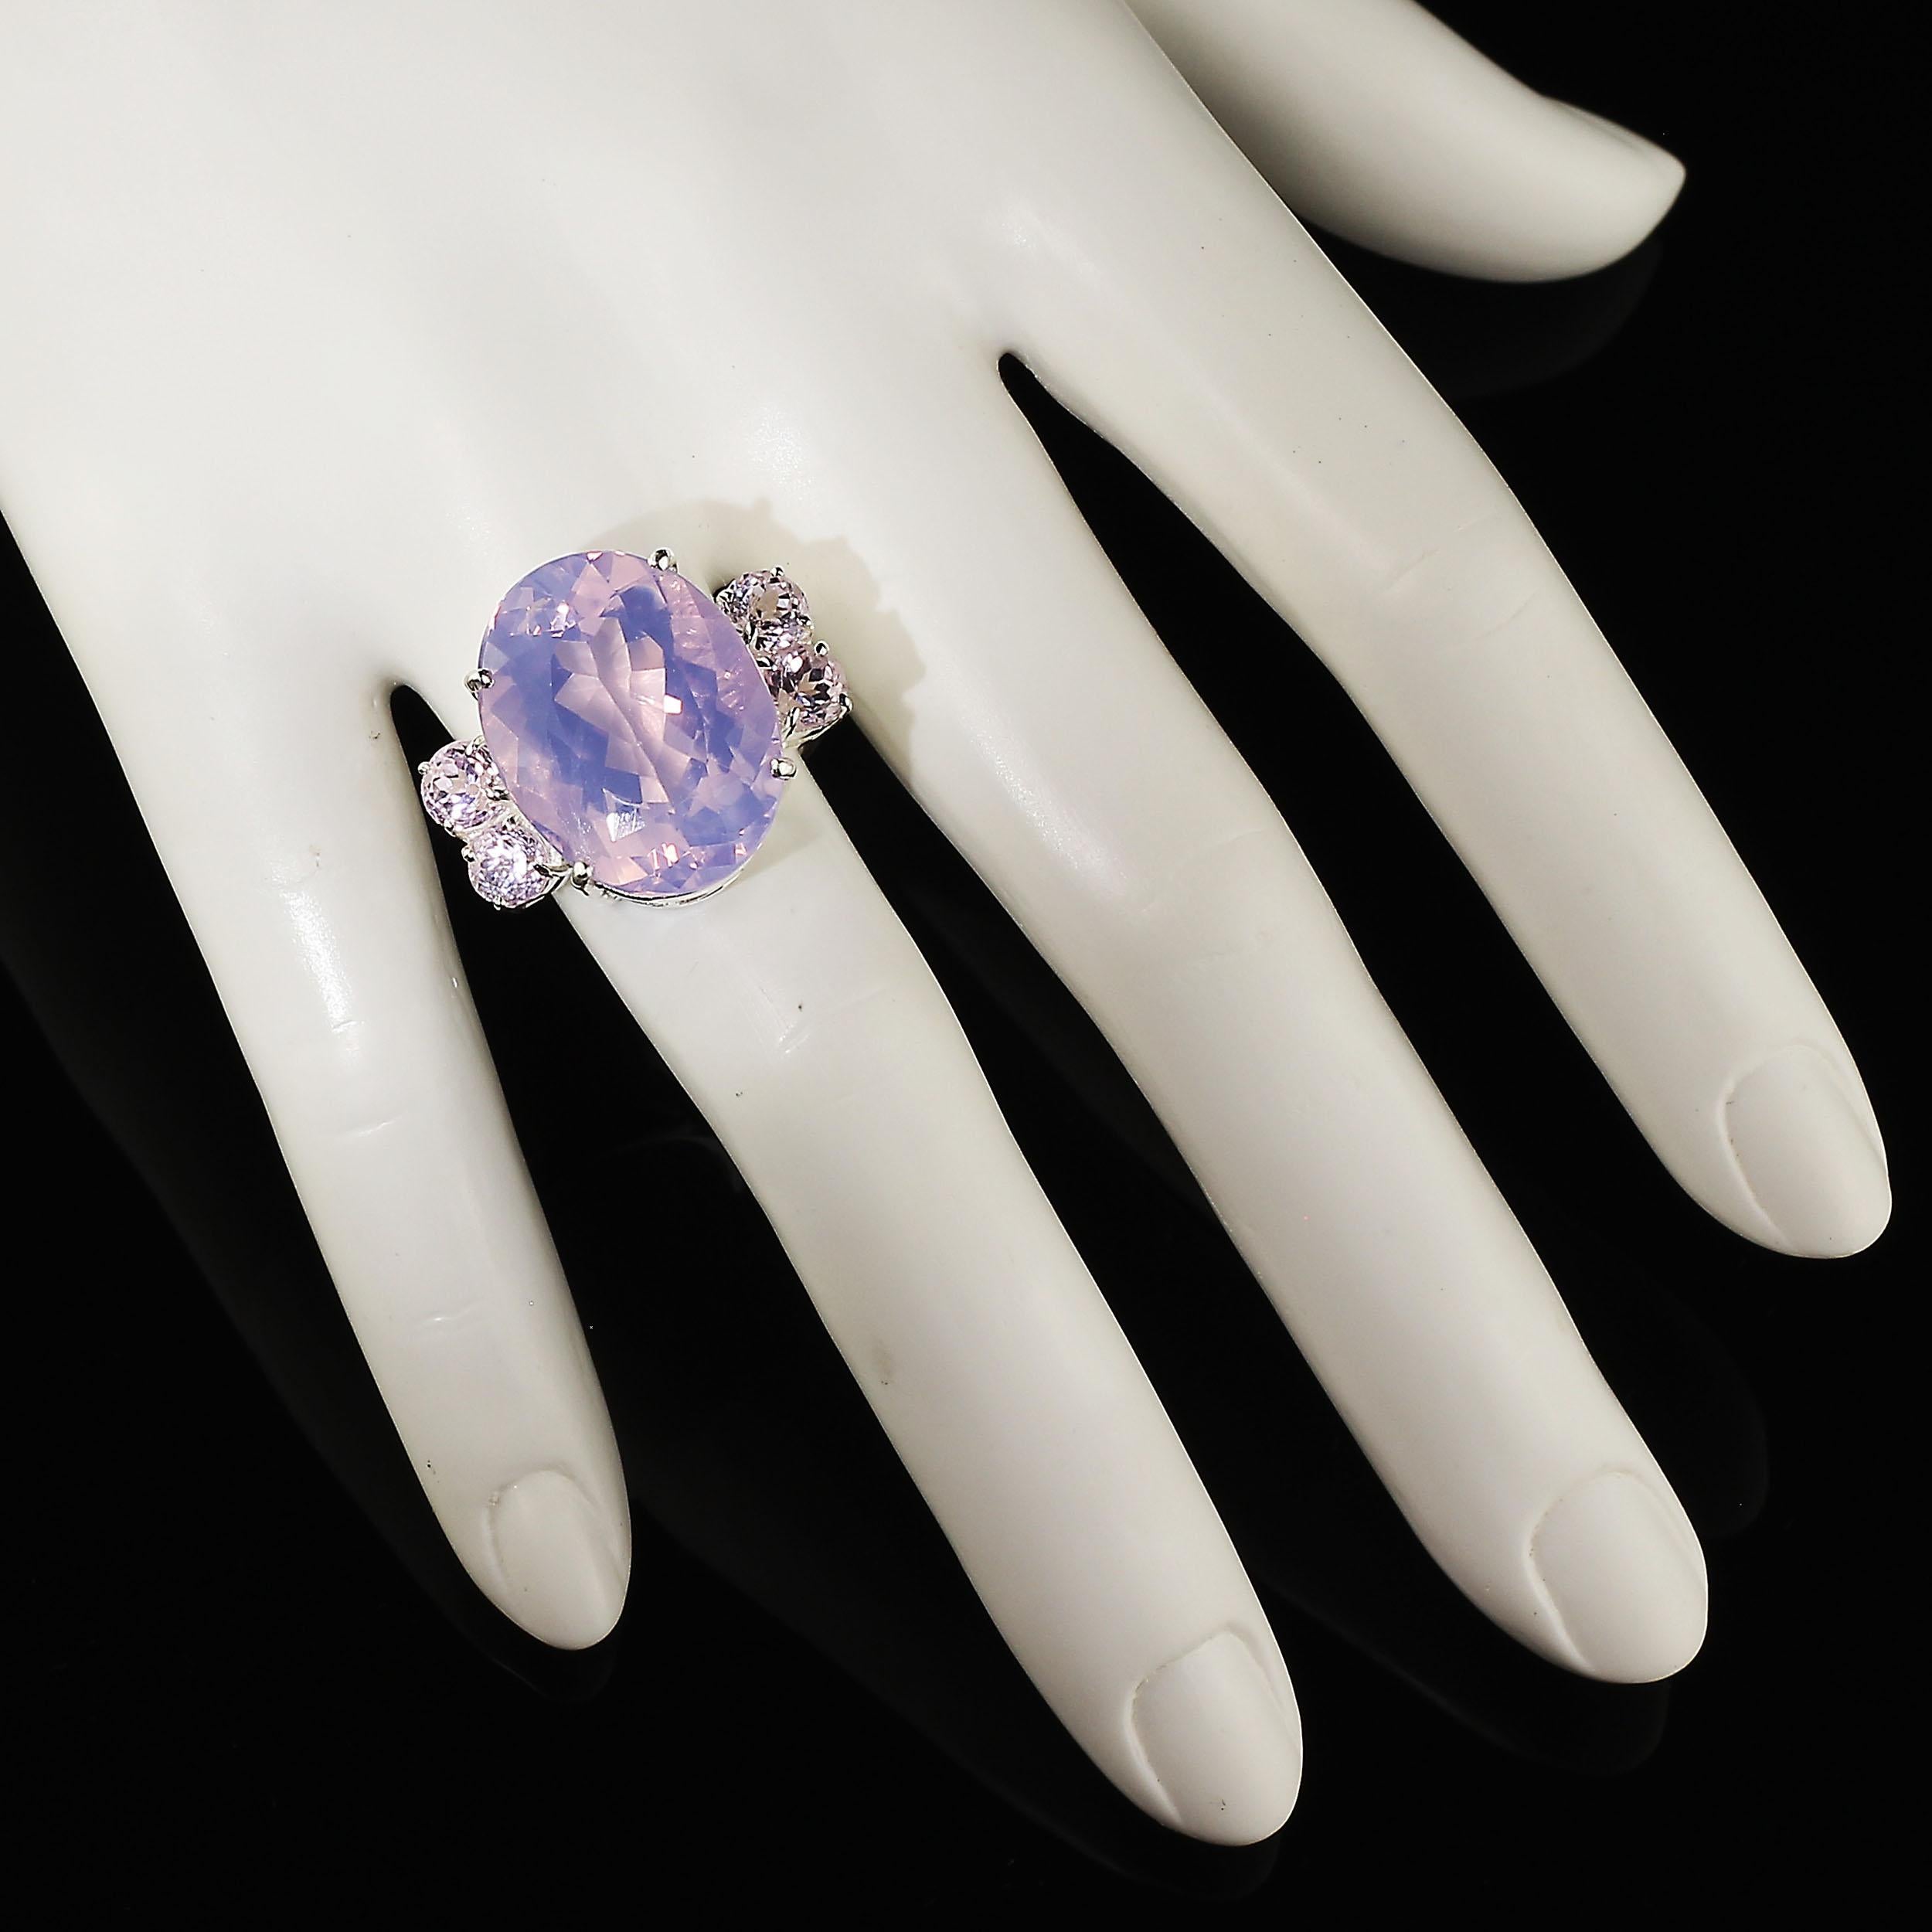 Yummy﻿ Lavender Quartz oval Cocktail Ring with four Rose of France accent gemstones.  If you love being noticed this is your ring!  23.15 carats of pizzazz. This Gemjunky size 7.5 ring is hand made Sterling Silver with a lovely basket in which the